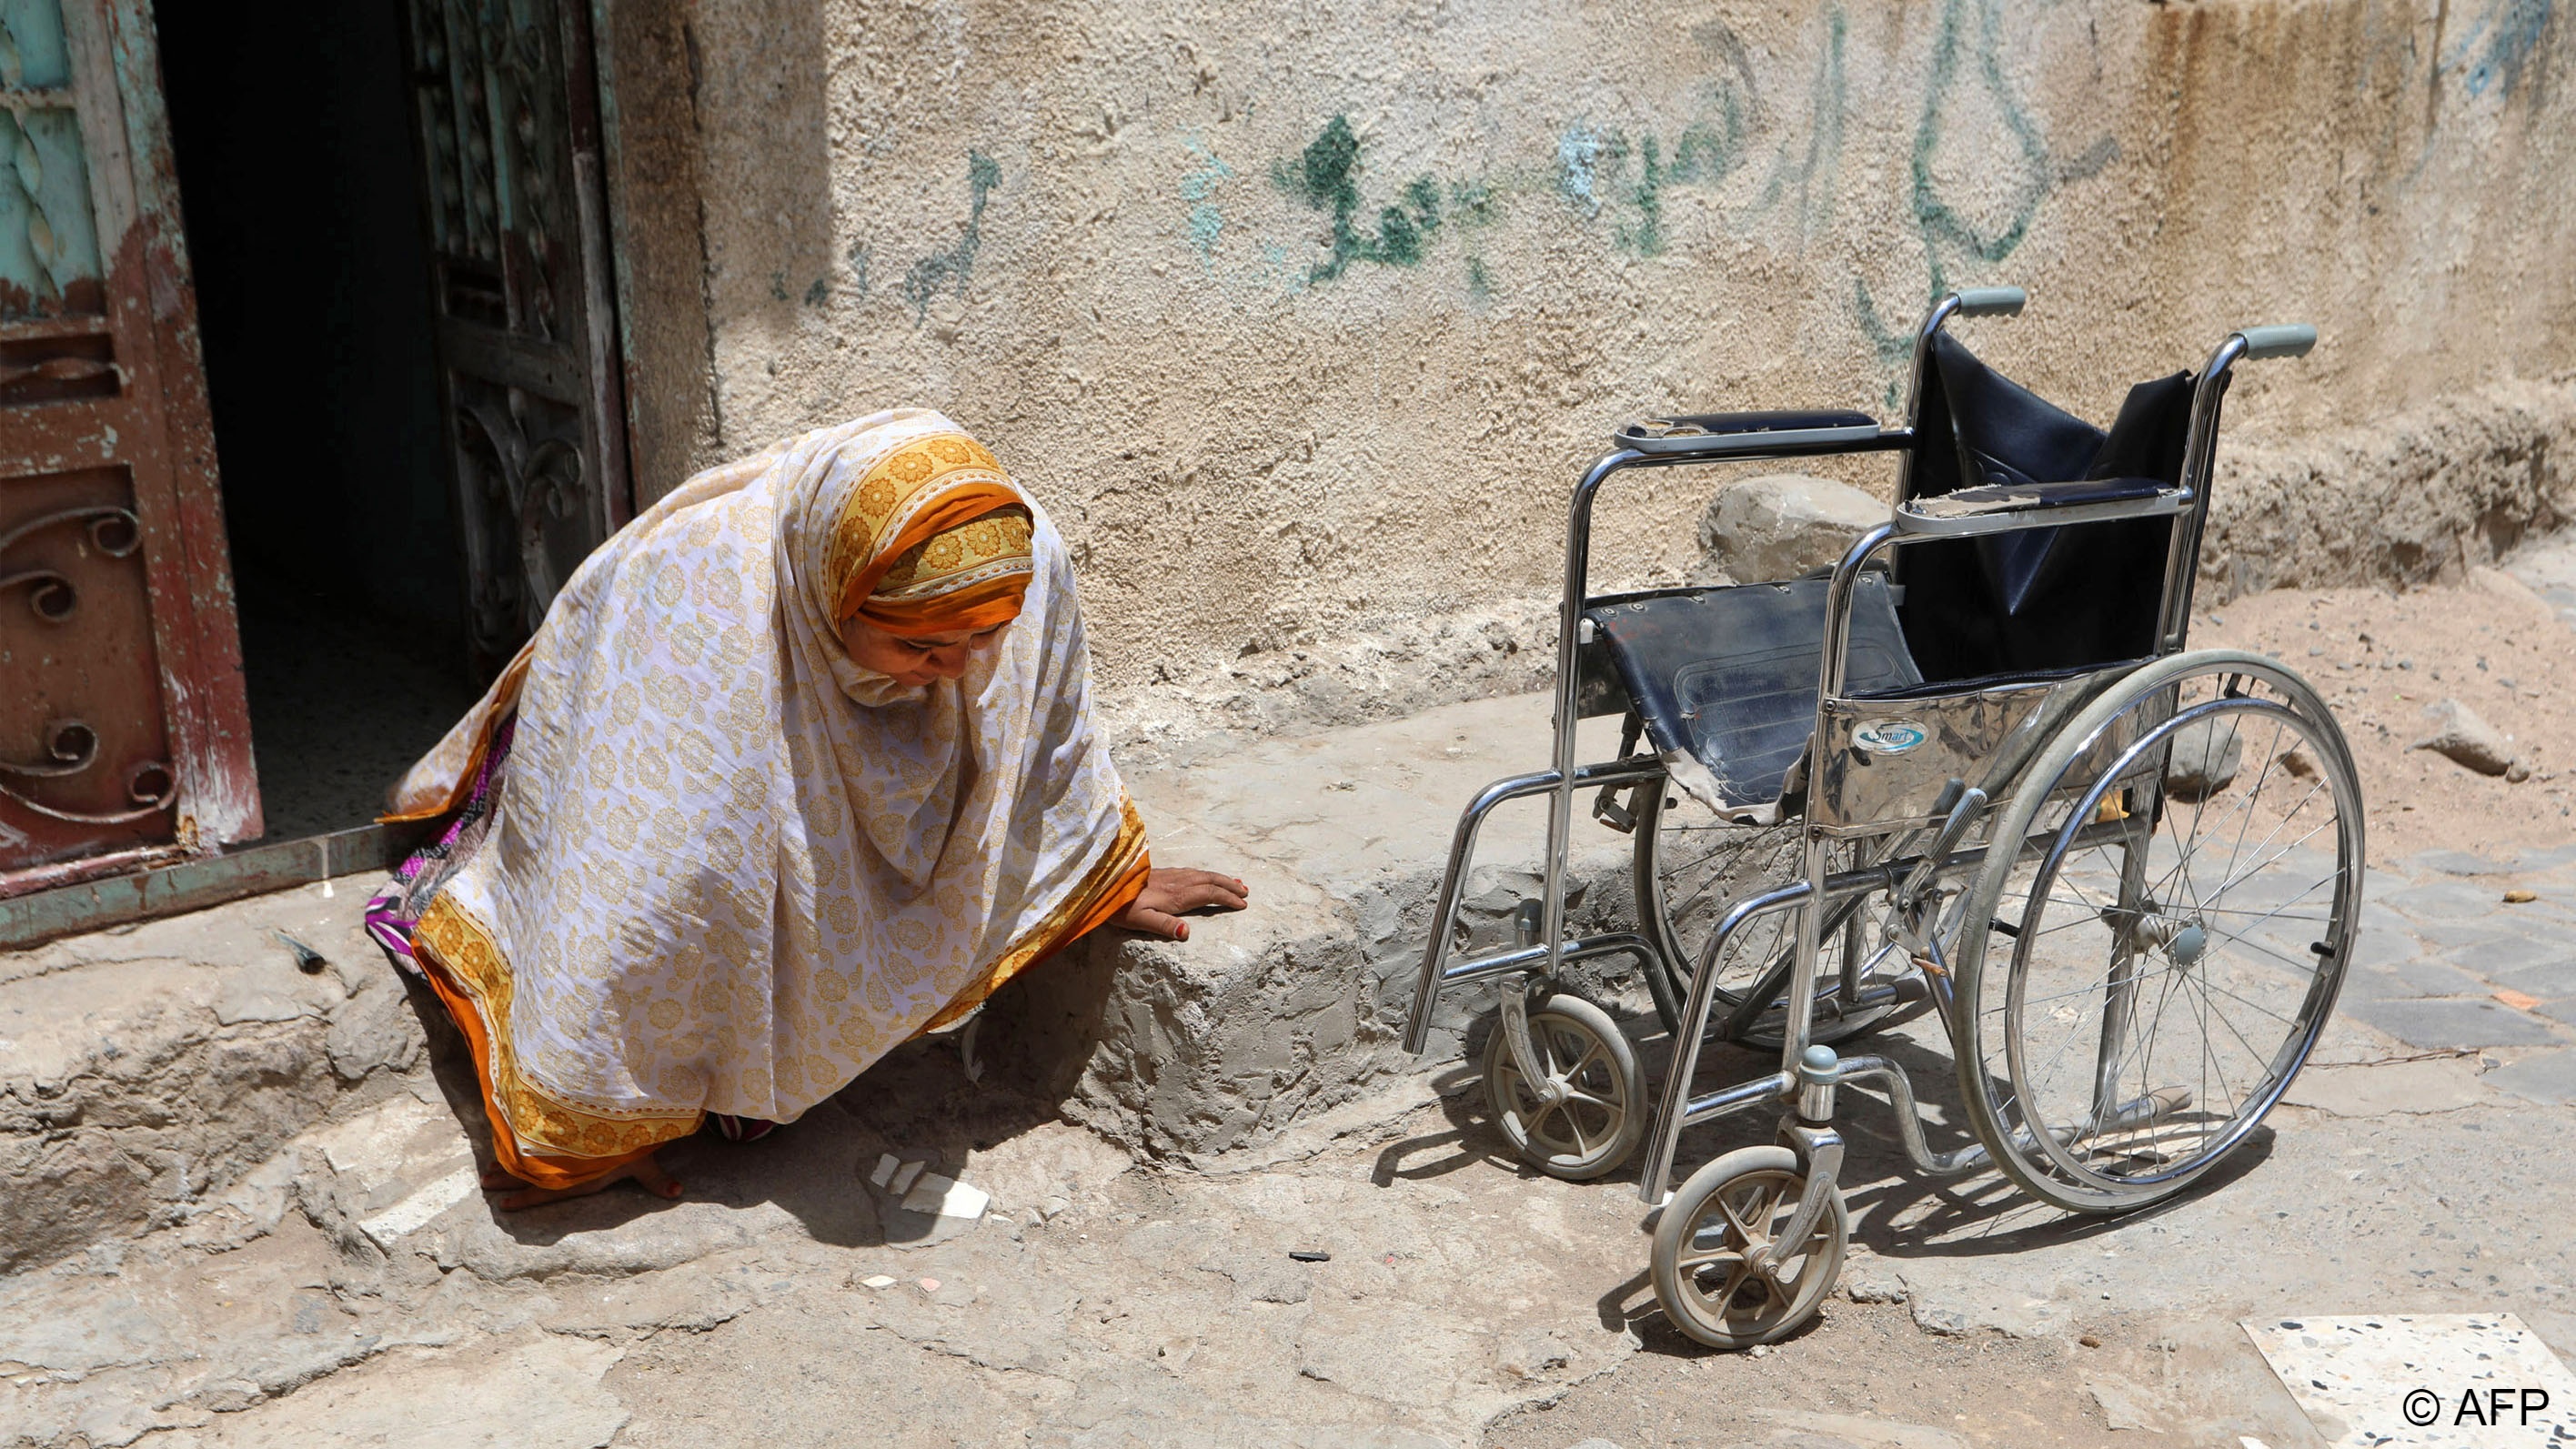  Jamila Qassem Mahyoub, a Yemeni woman whose legs were amputated after stepping on a landmine while herding her sheep in 2017, leaves her house to go to her shop in the city of Taez on 20 March 2019 (photo: AHMAD AL-BASHA AFP/File) 